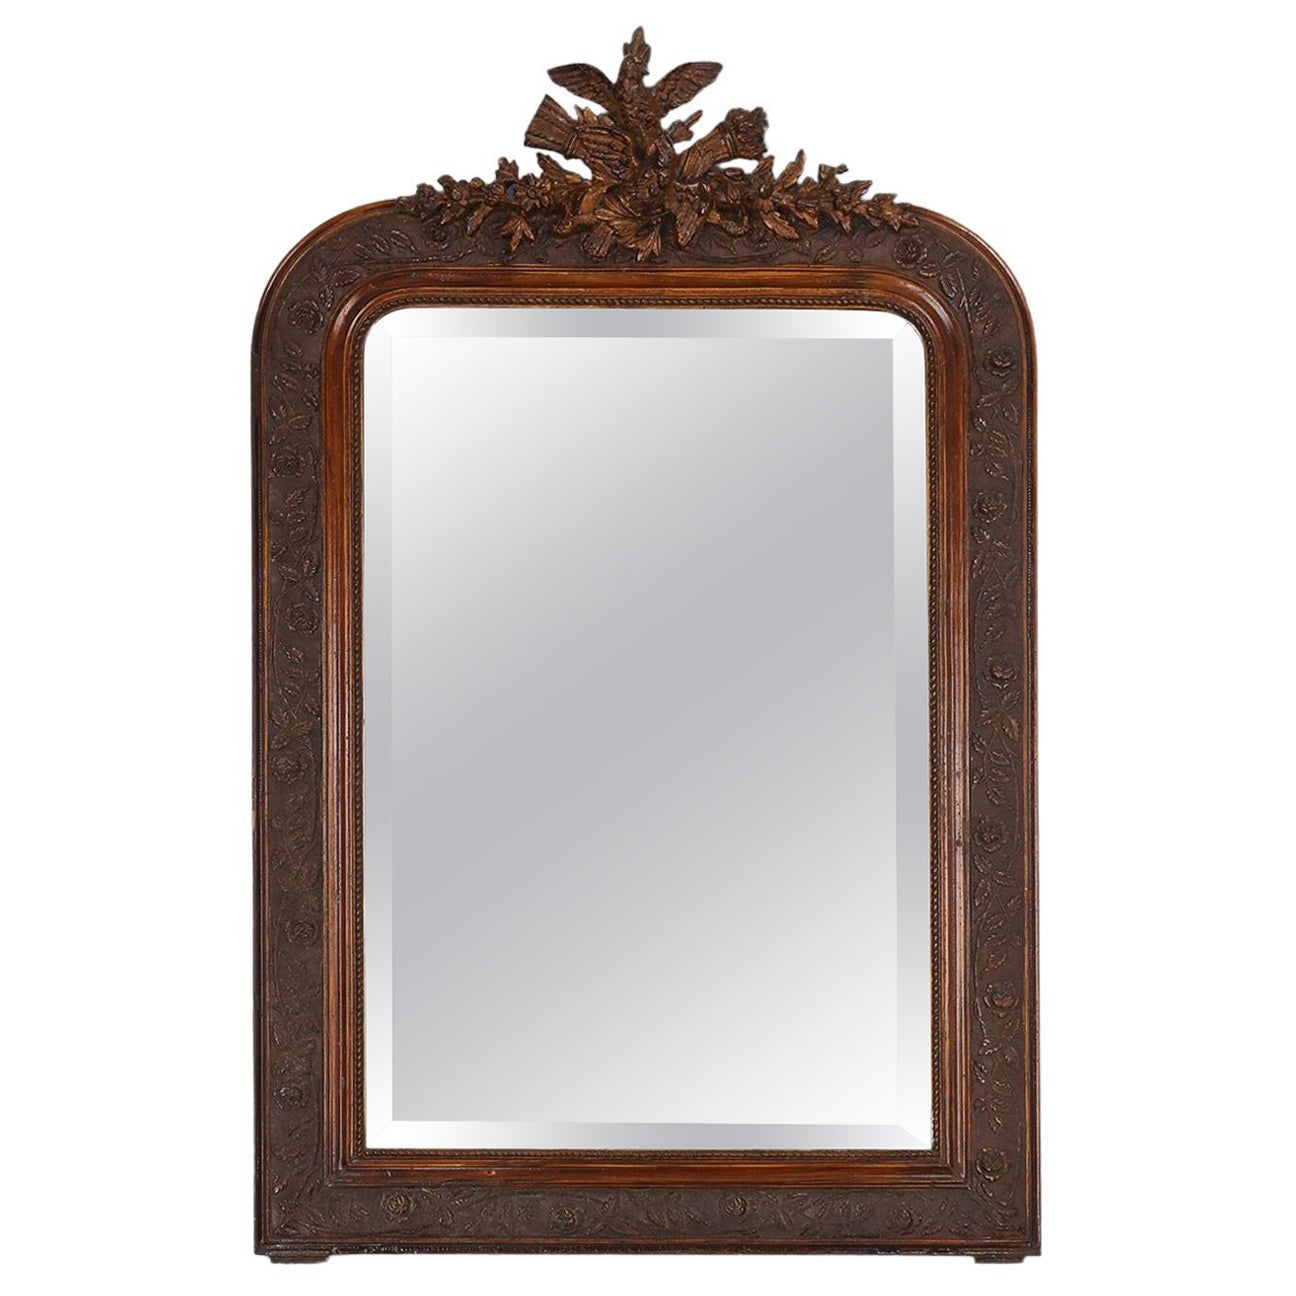 Louis Philippe mirror in plaster and wood with handcrafted decorations, France c